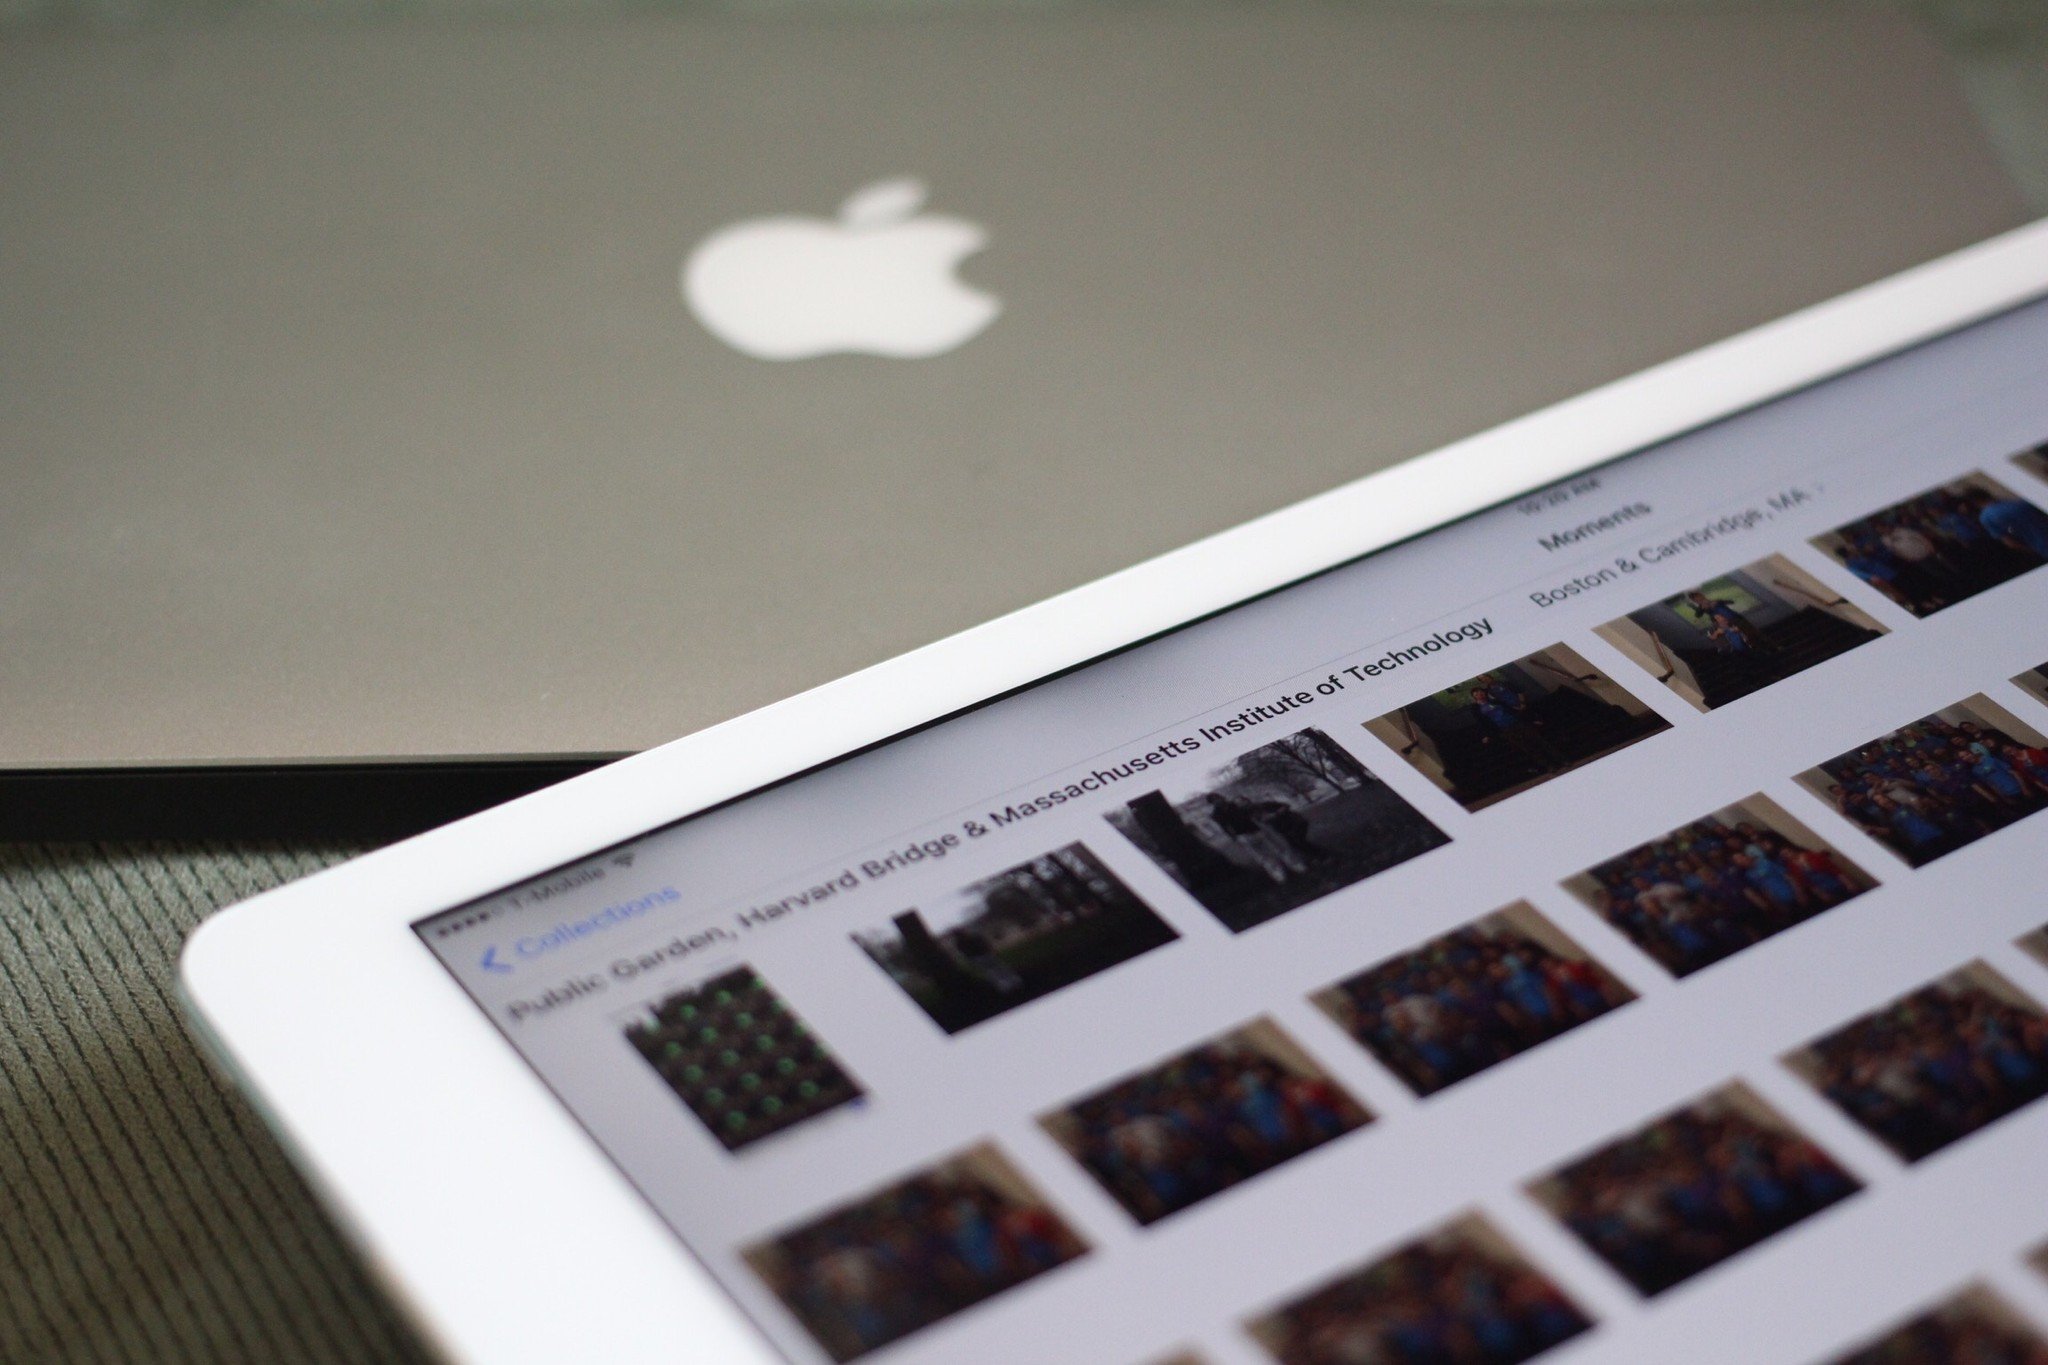 How to transfer photos from your Mac or PC to your iPhone and iPad | iMore